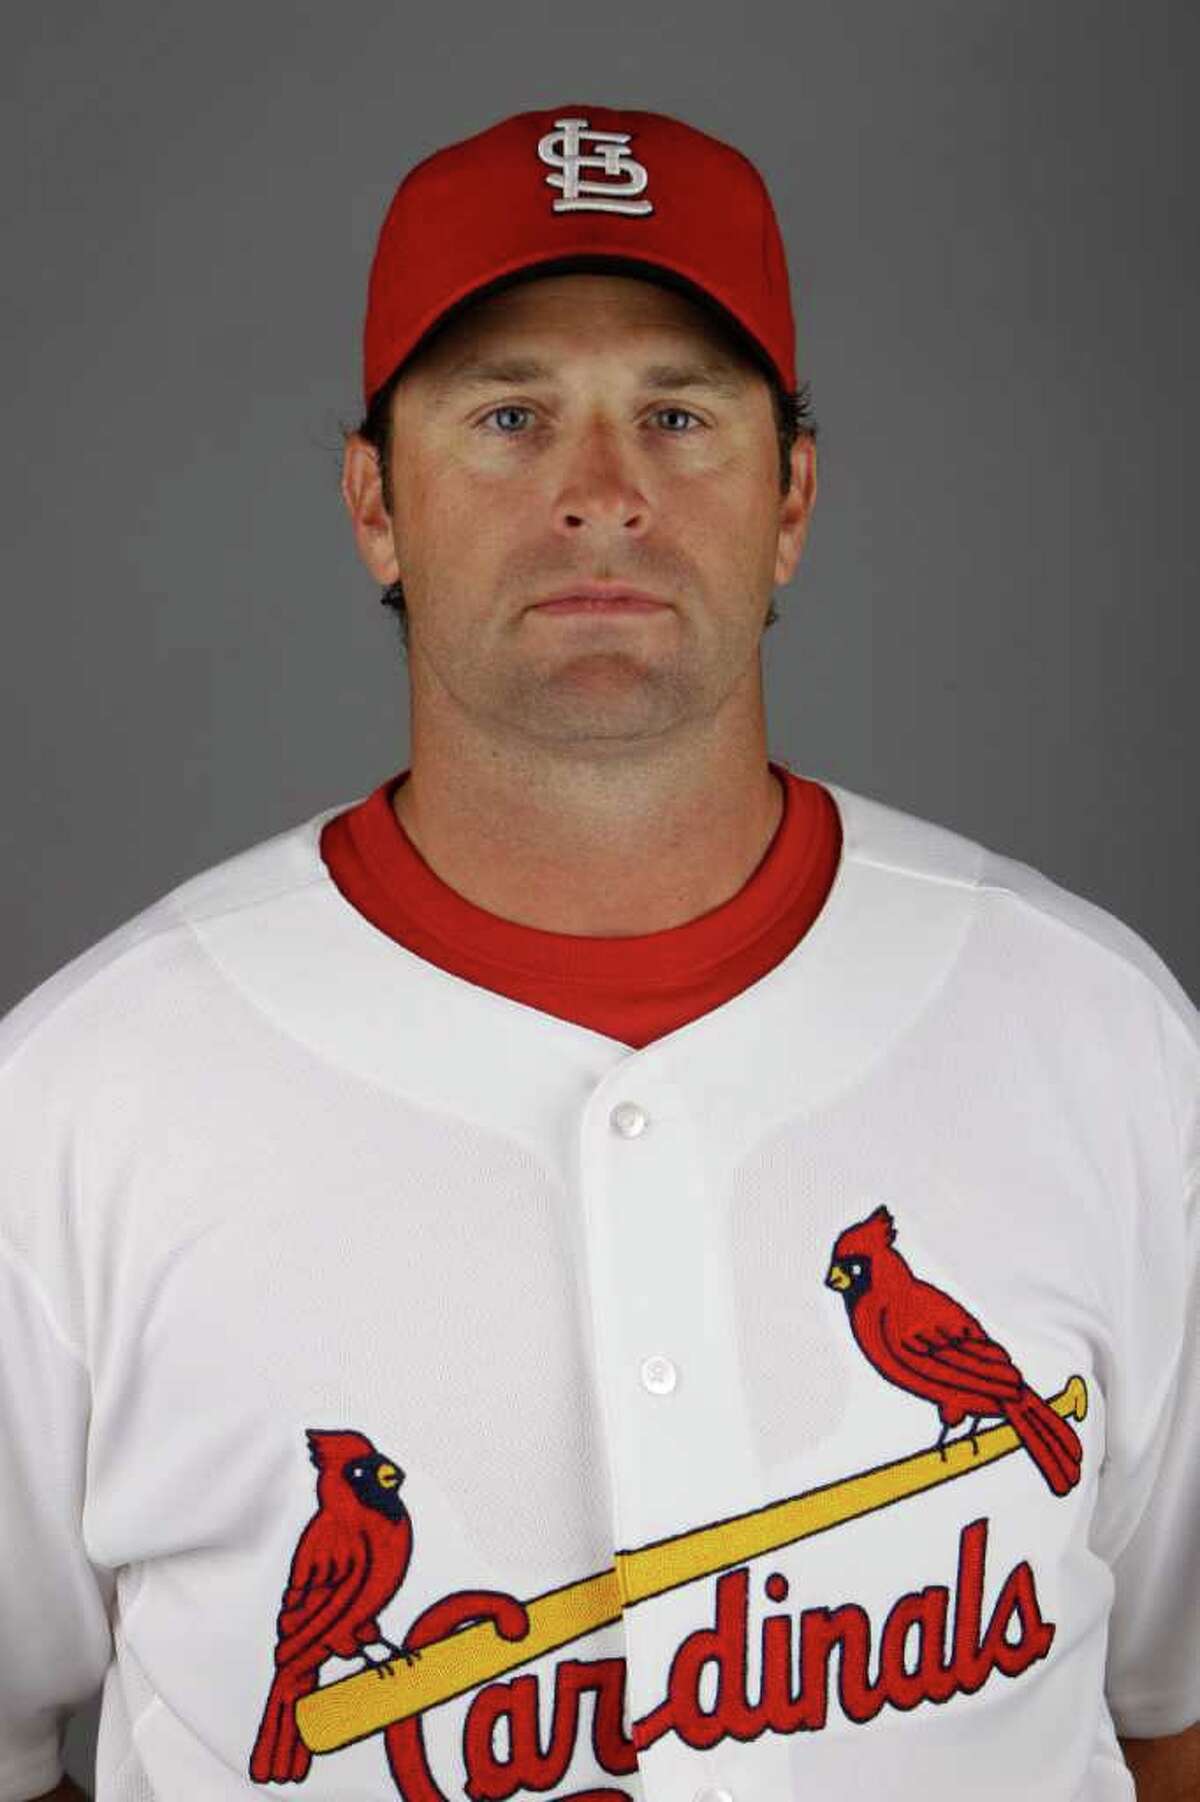 This is a 2011 photo of Mike Matheny of the St. Louis Cardinals baseball team. The Cardinals have called a news conference Sunday Nov. 13, 2011 to announce the hiring of Matheny as manager. (AP Photo/Jeff Roberson)